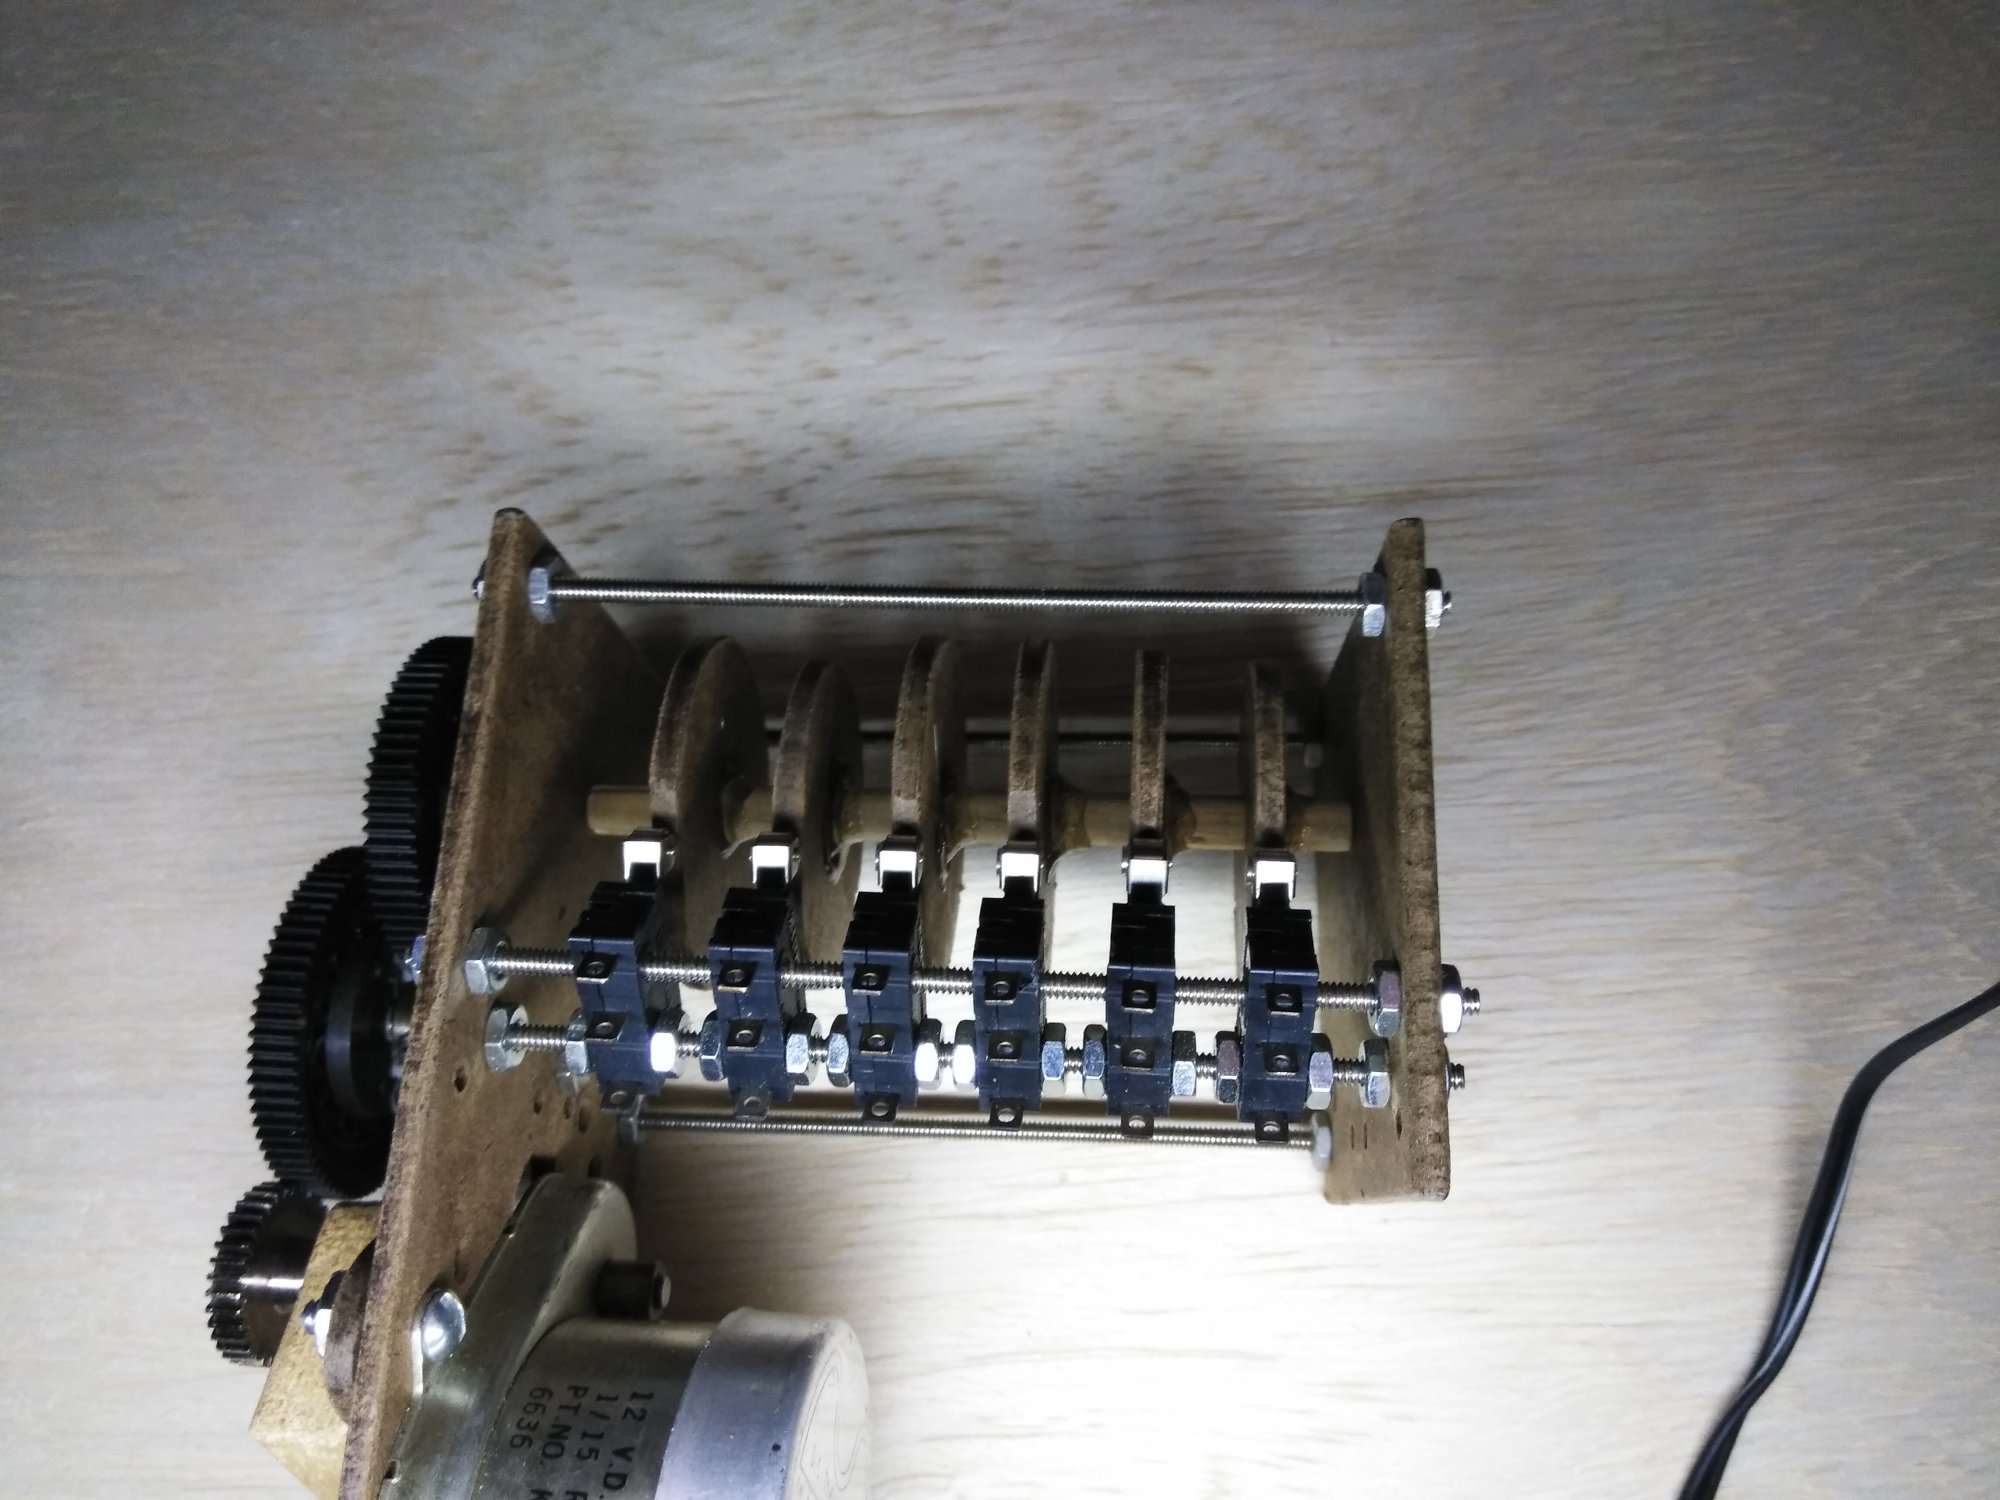 Timer with six channels